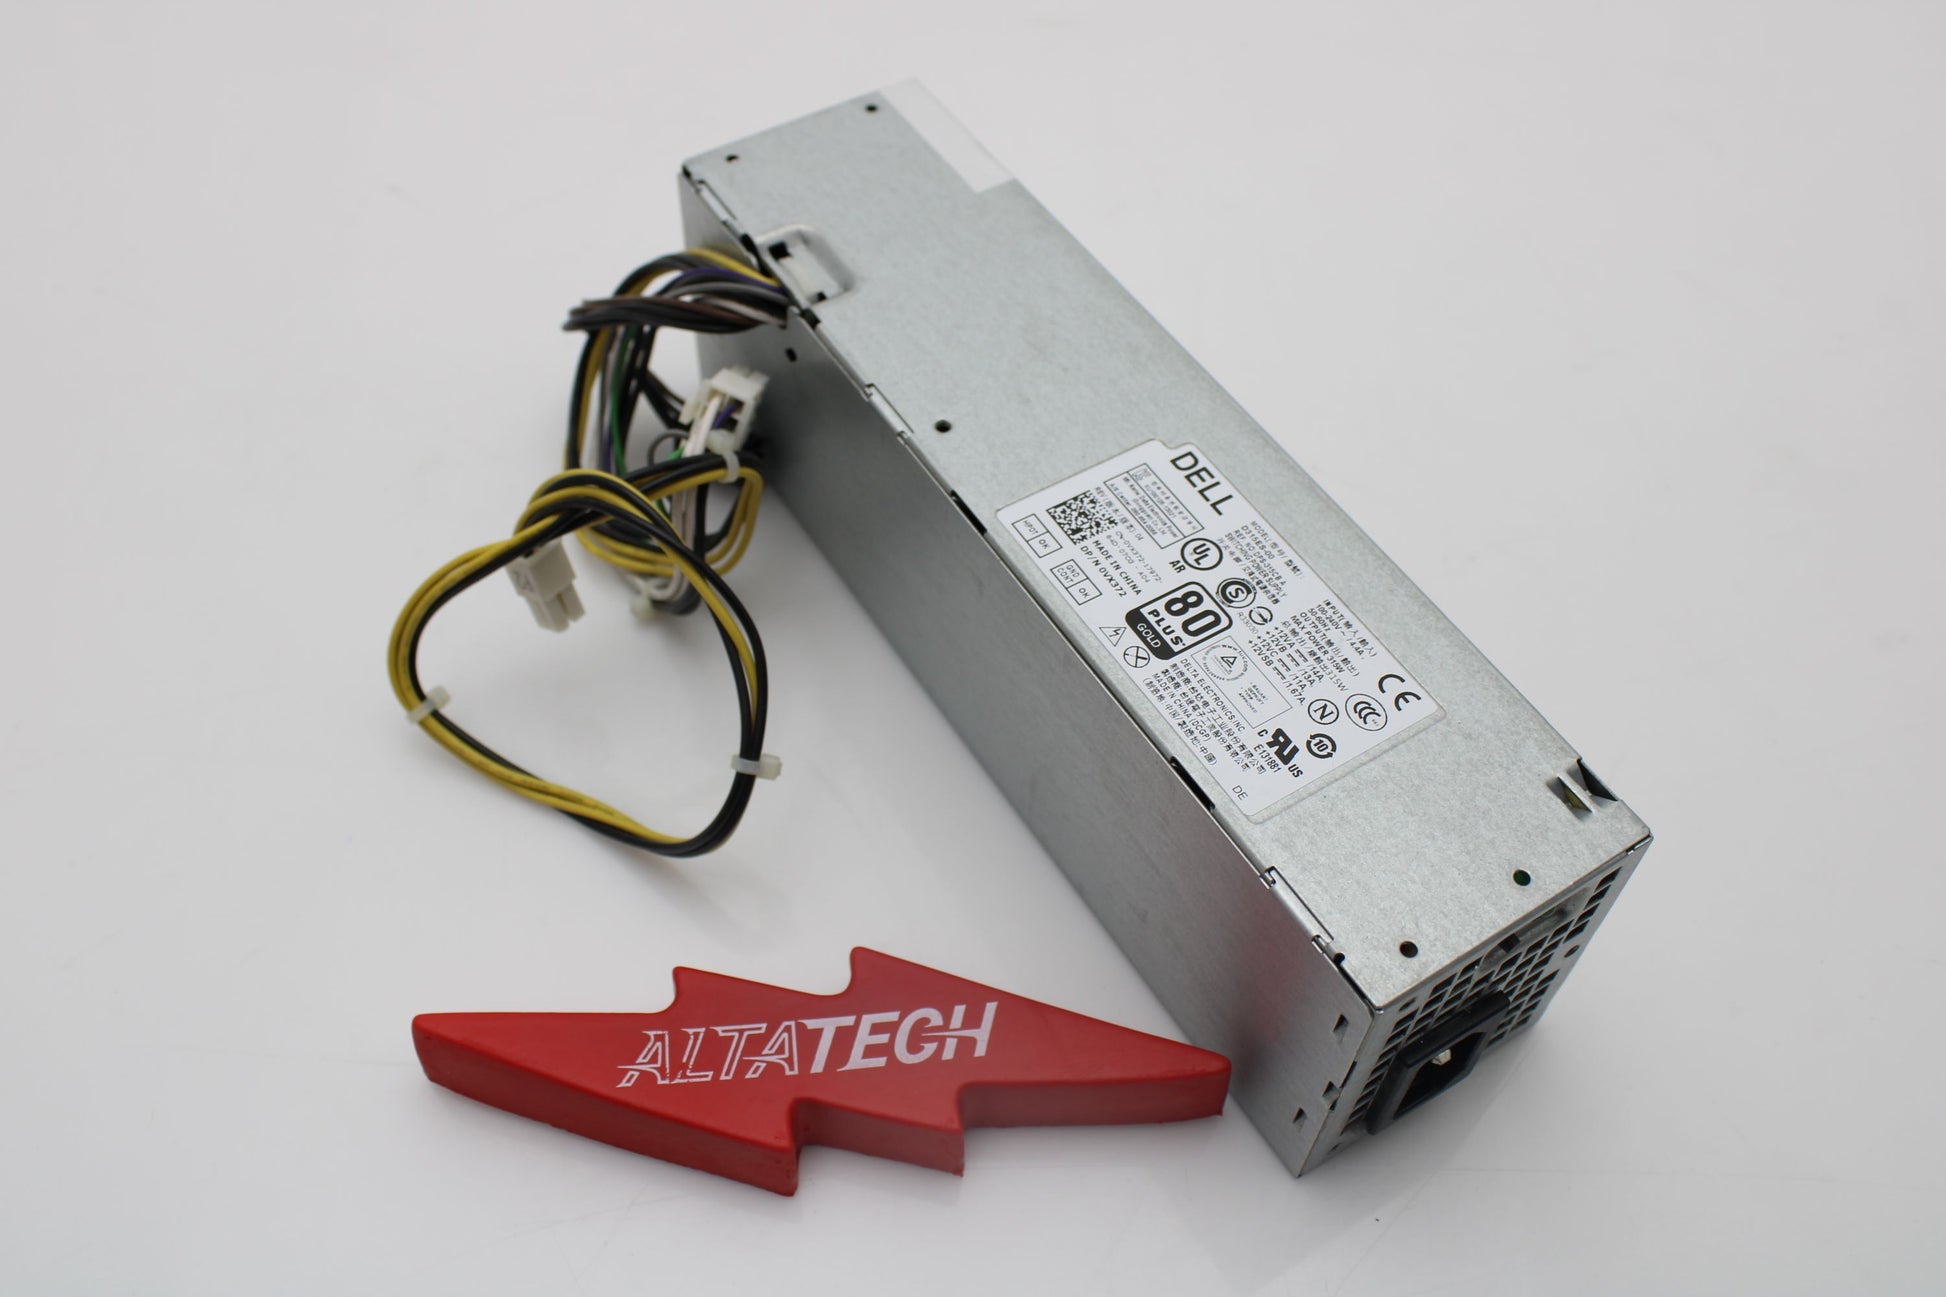 Dell VX372 OptiPlex 315W Power Supply for XE2 SFF Desktop, Used